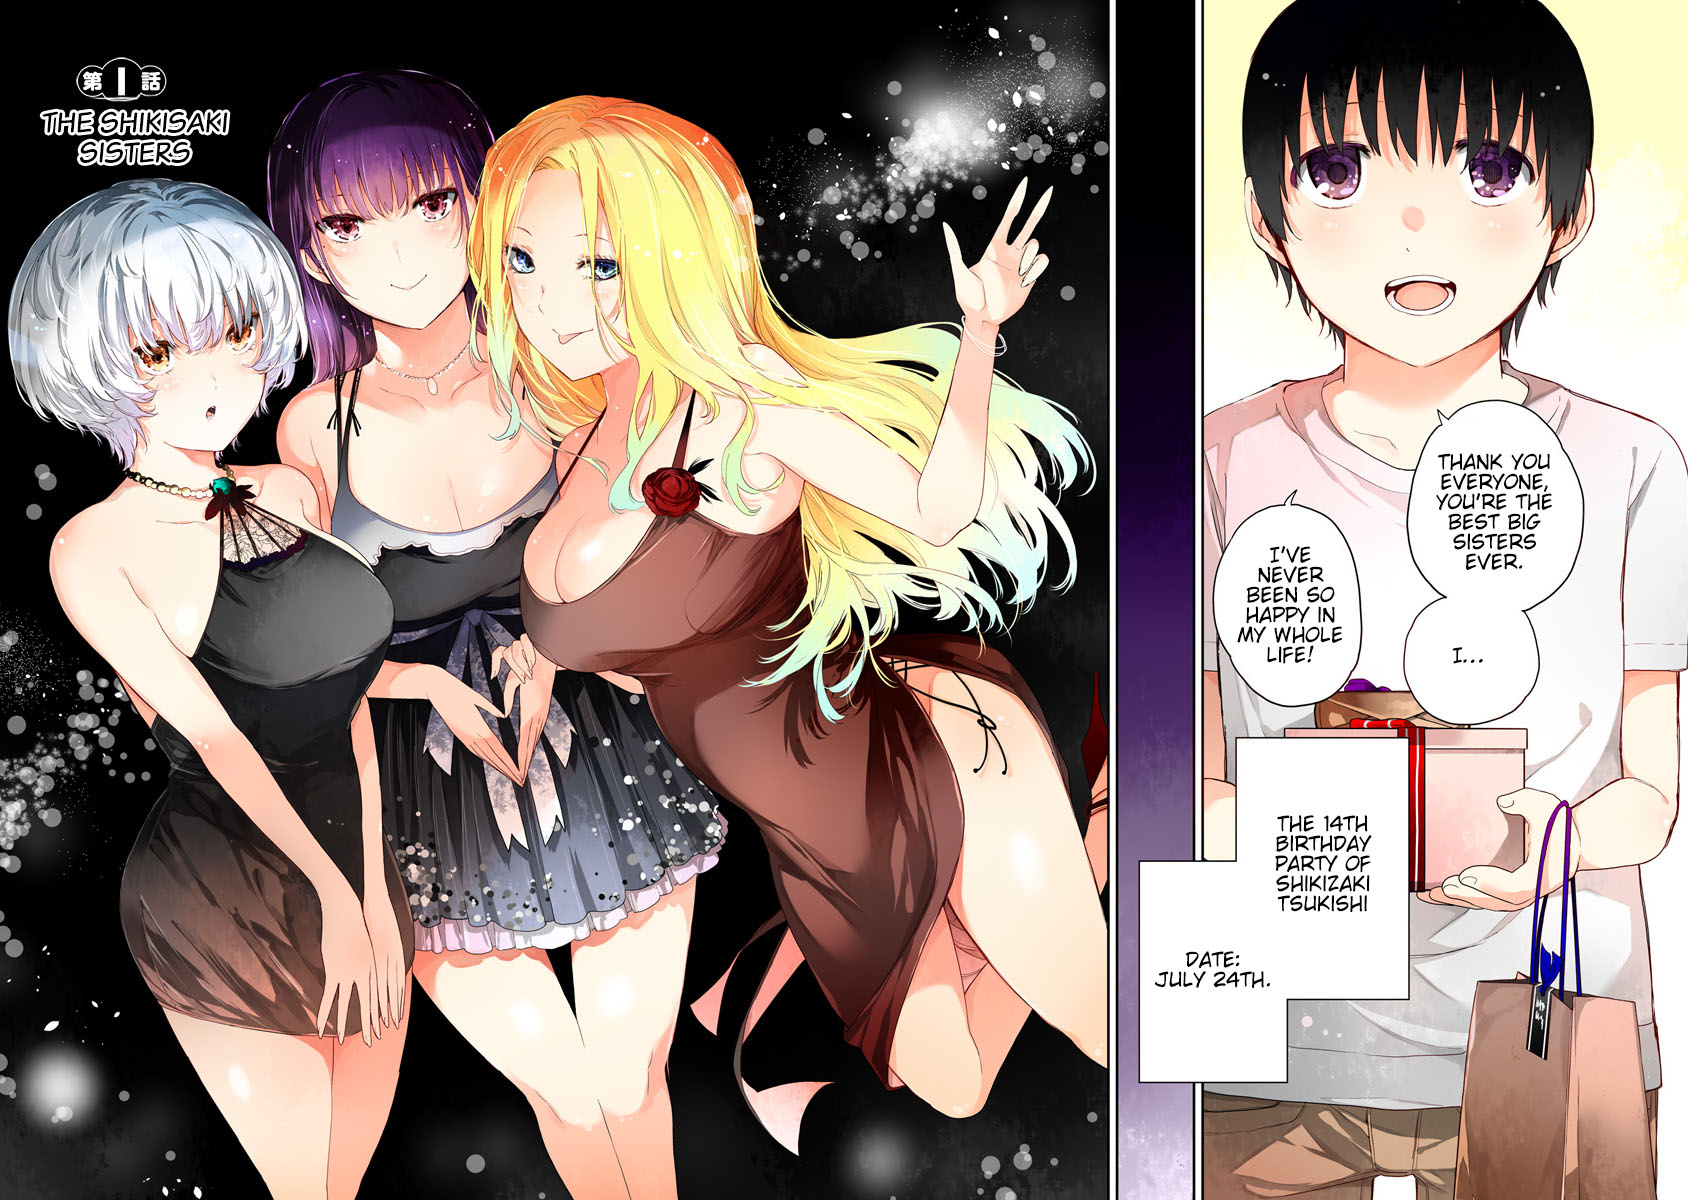 The Shikisaki Sisters Want To Be Exposed - Page 2